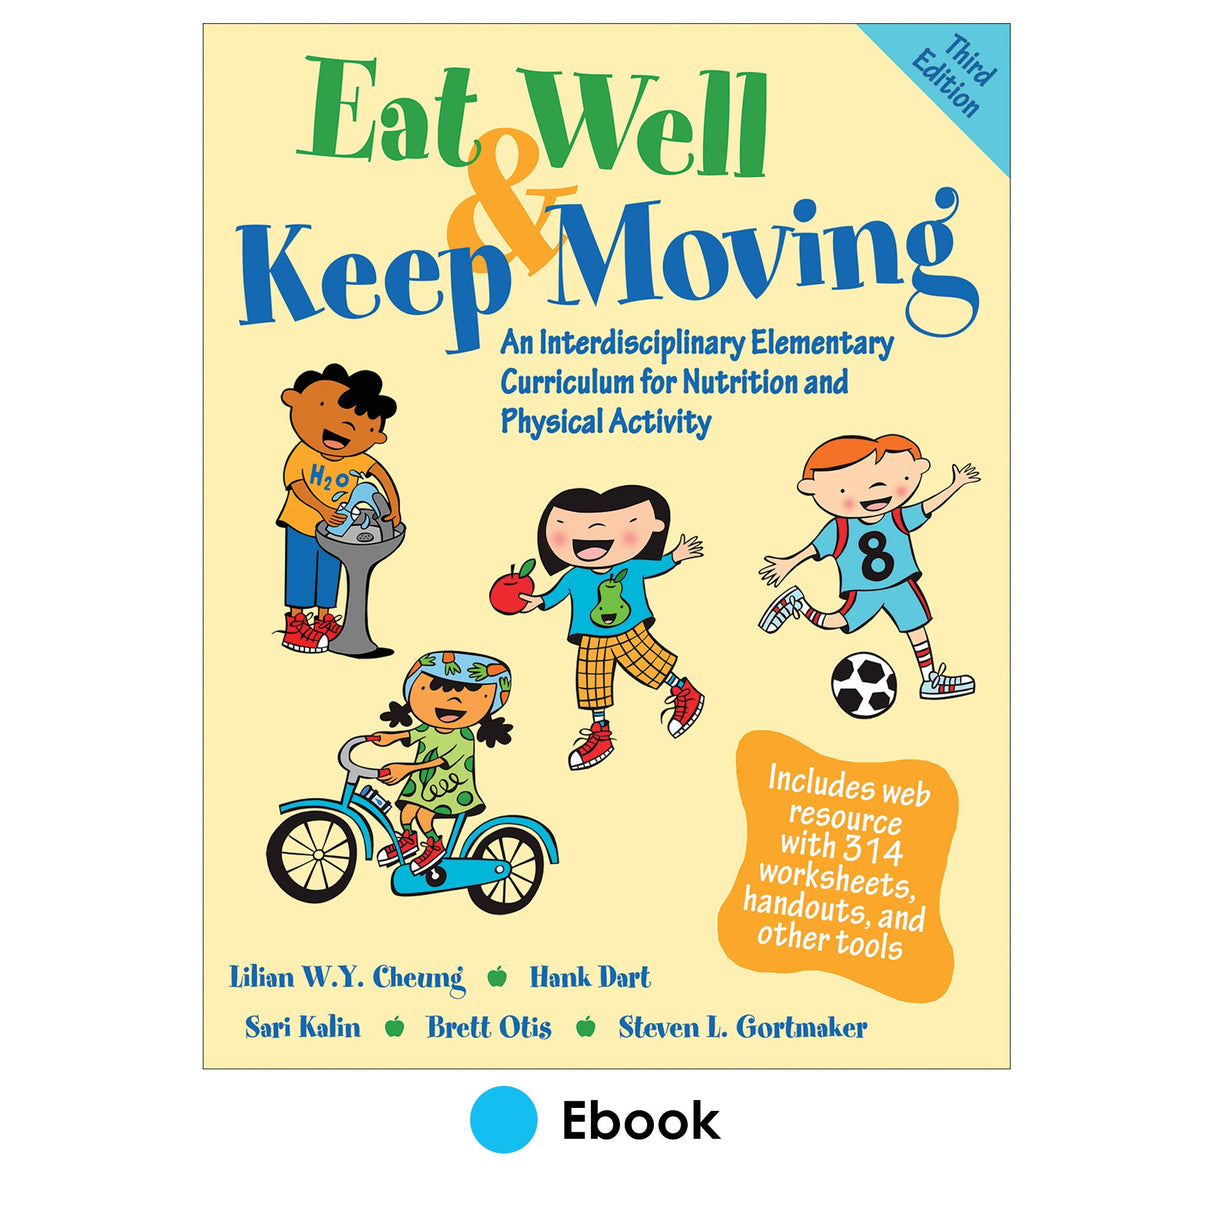 Eat Well & Keep Moving 3rd Edition PDF With Web Resource